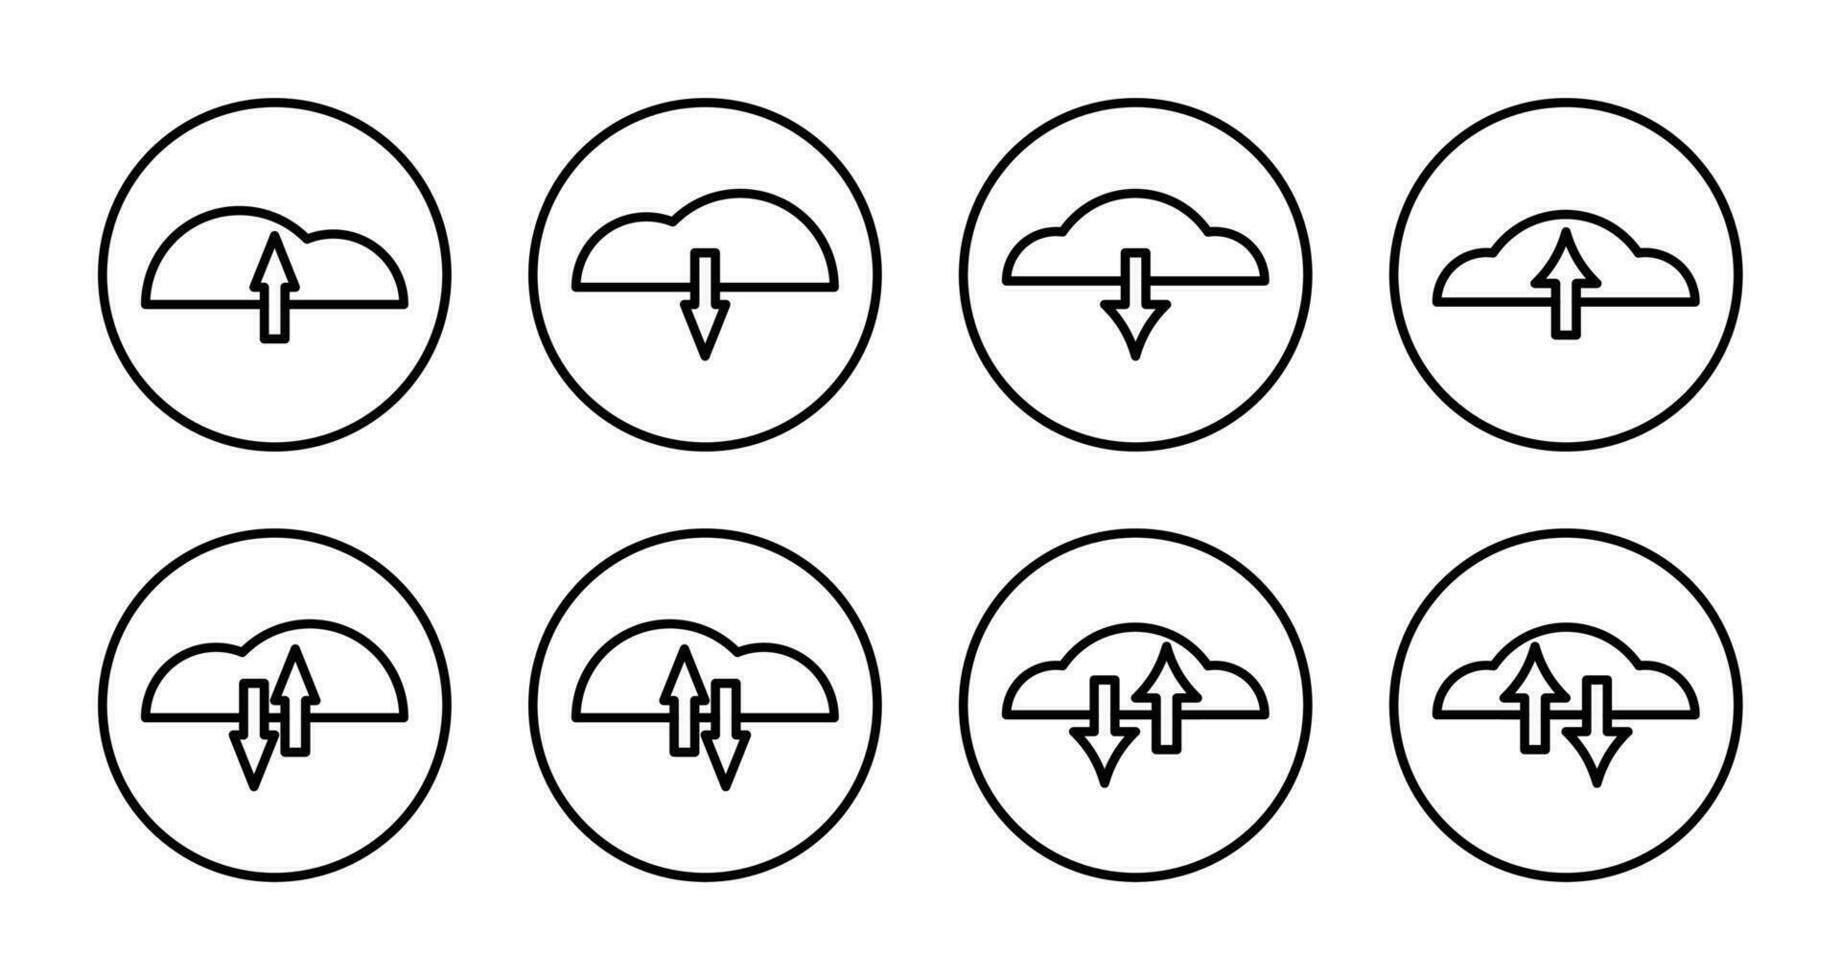 upload and download icon set, with arrow and cloud symbol. technology, internet and computer concept. vector for mobile app, web.